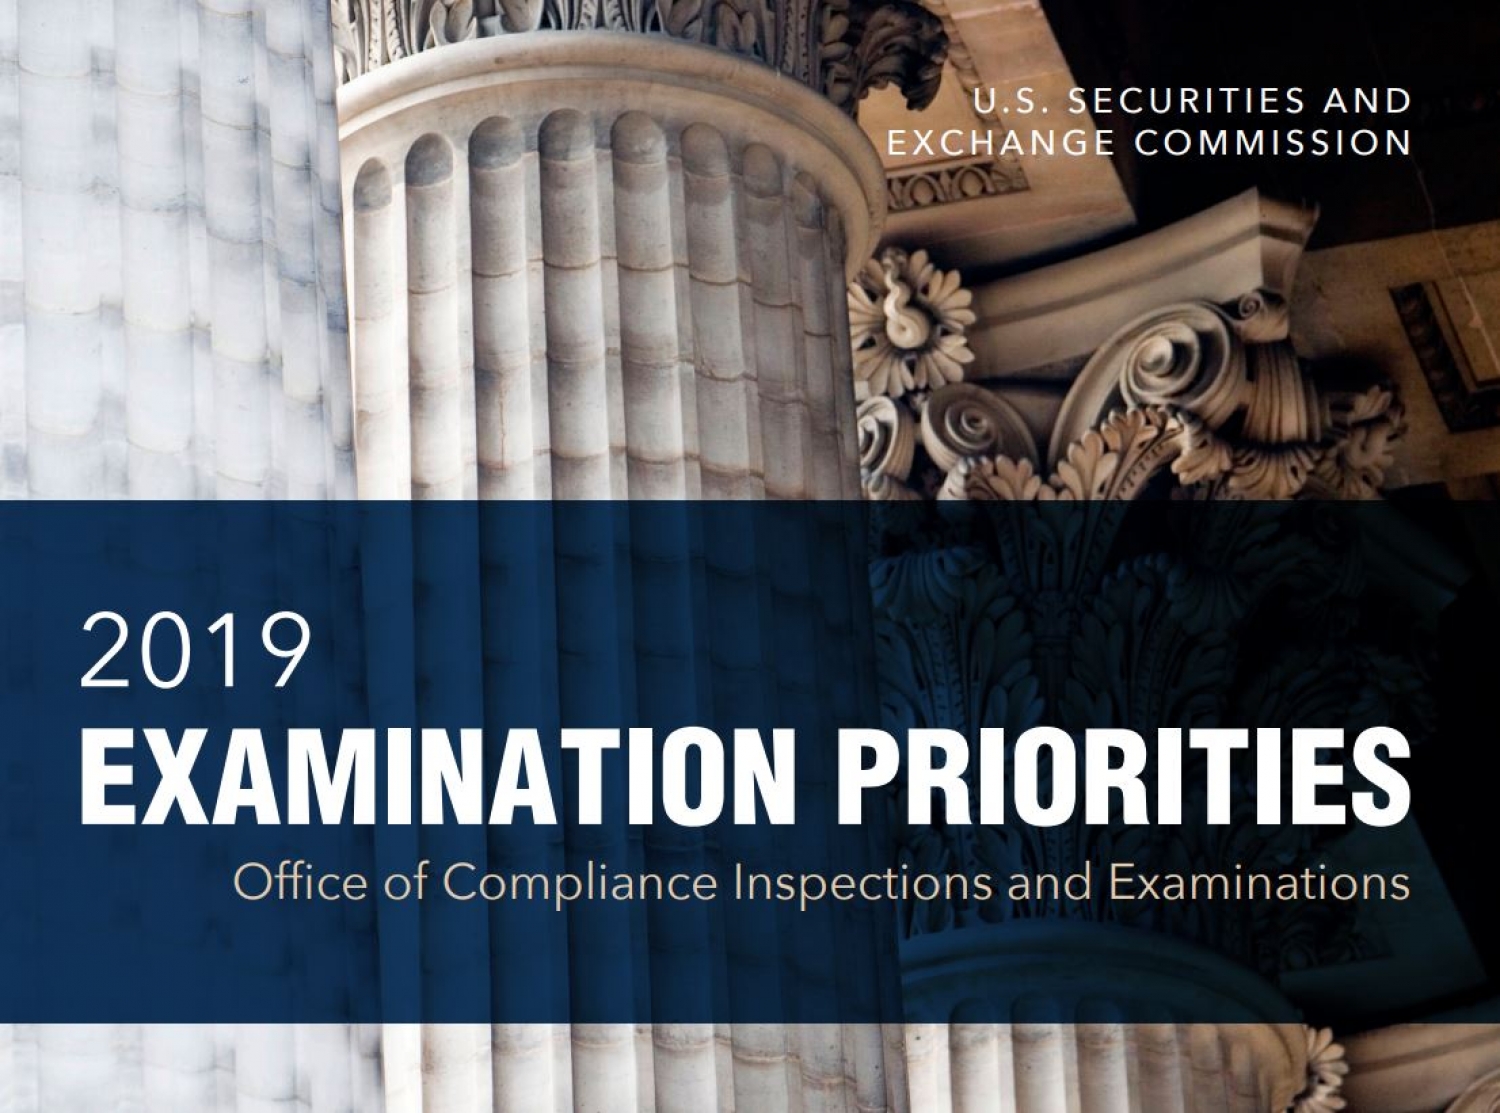 2019 EXAMINATION PRIORITIES: OFFICE OF COMPLIANCE INSPECTIONS AND EXAMINATIONS